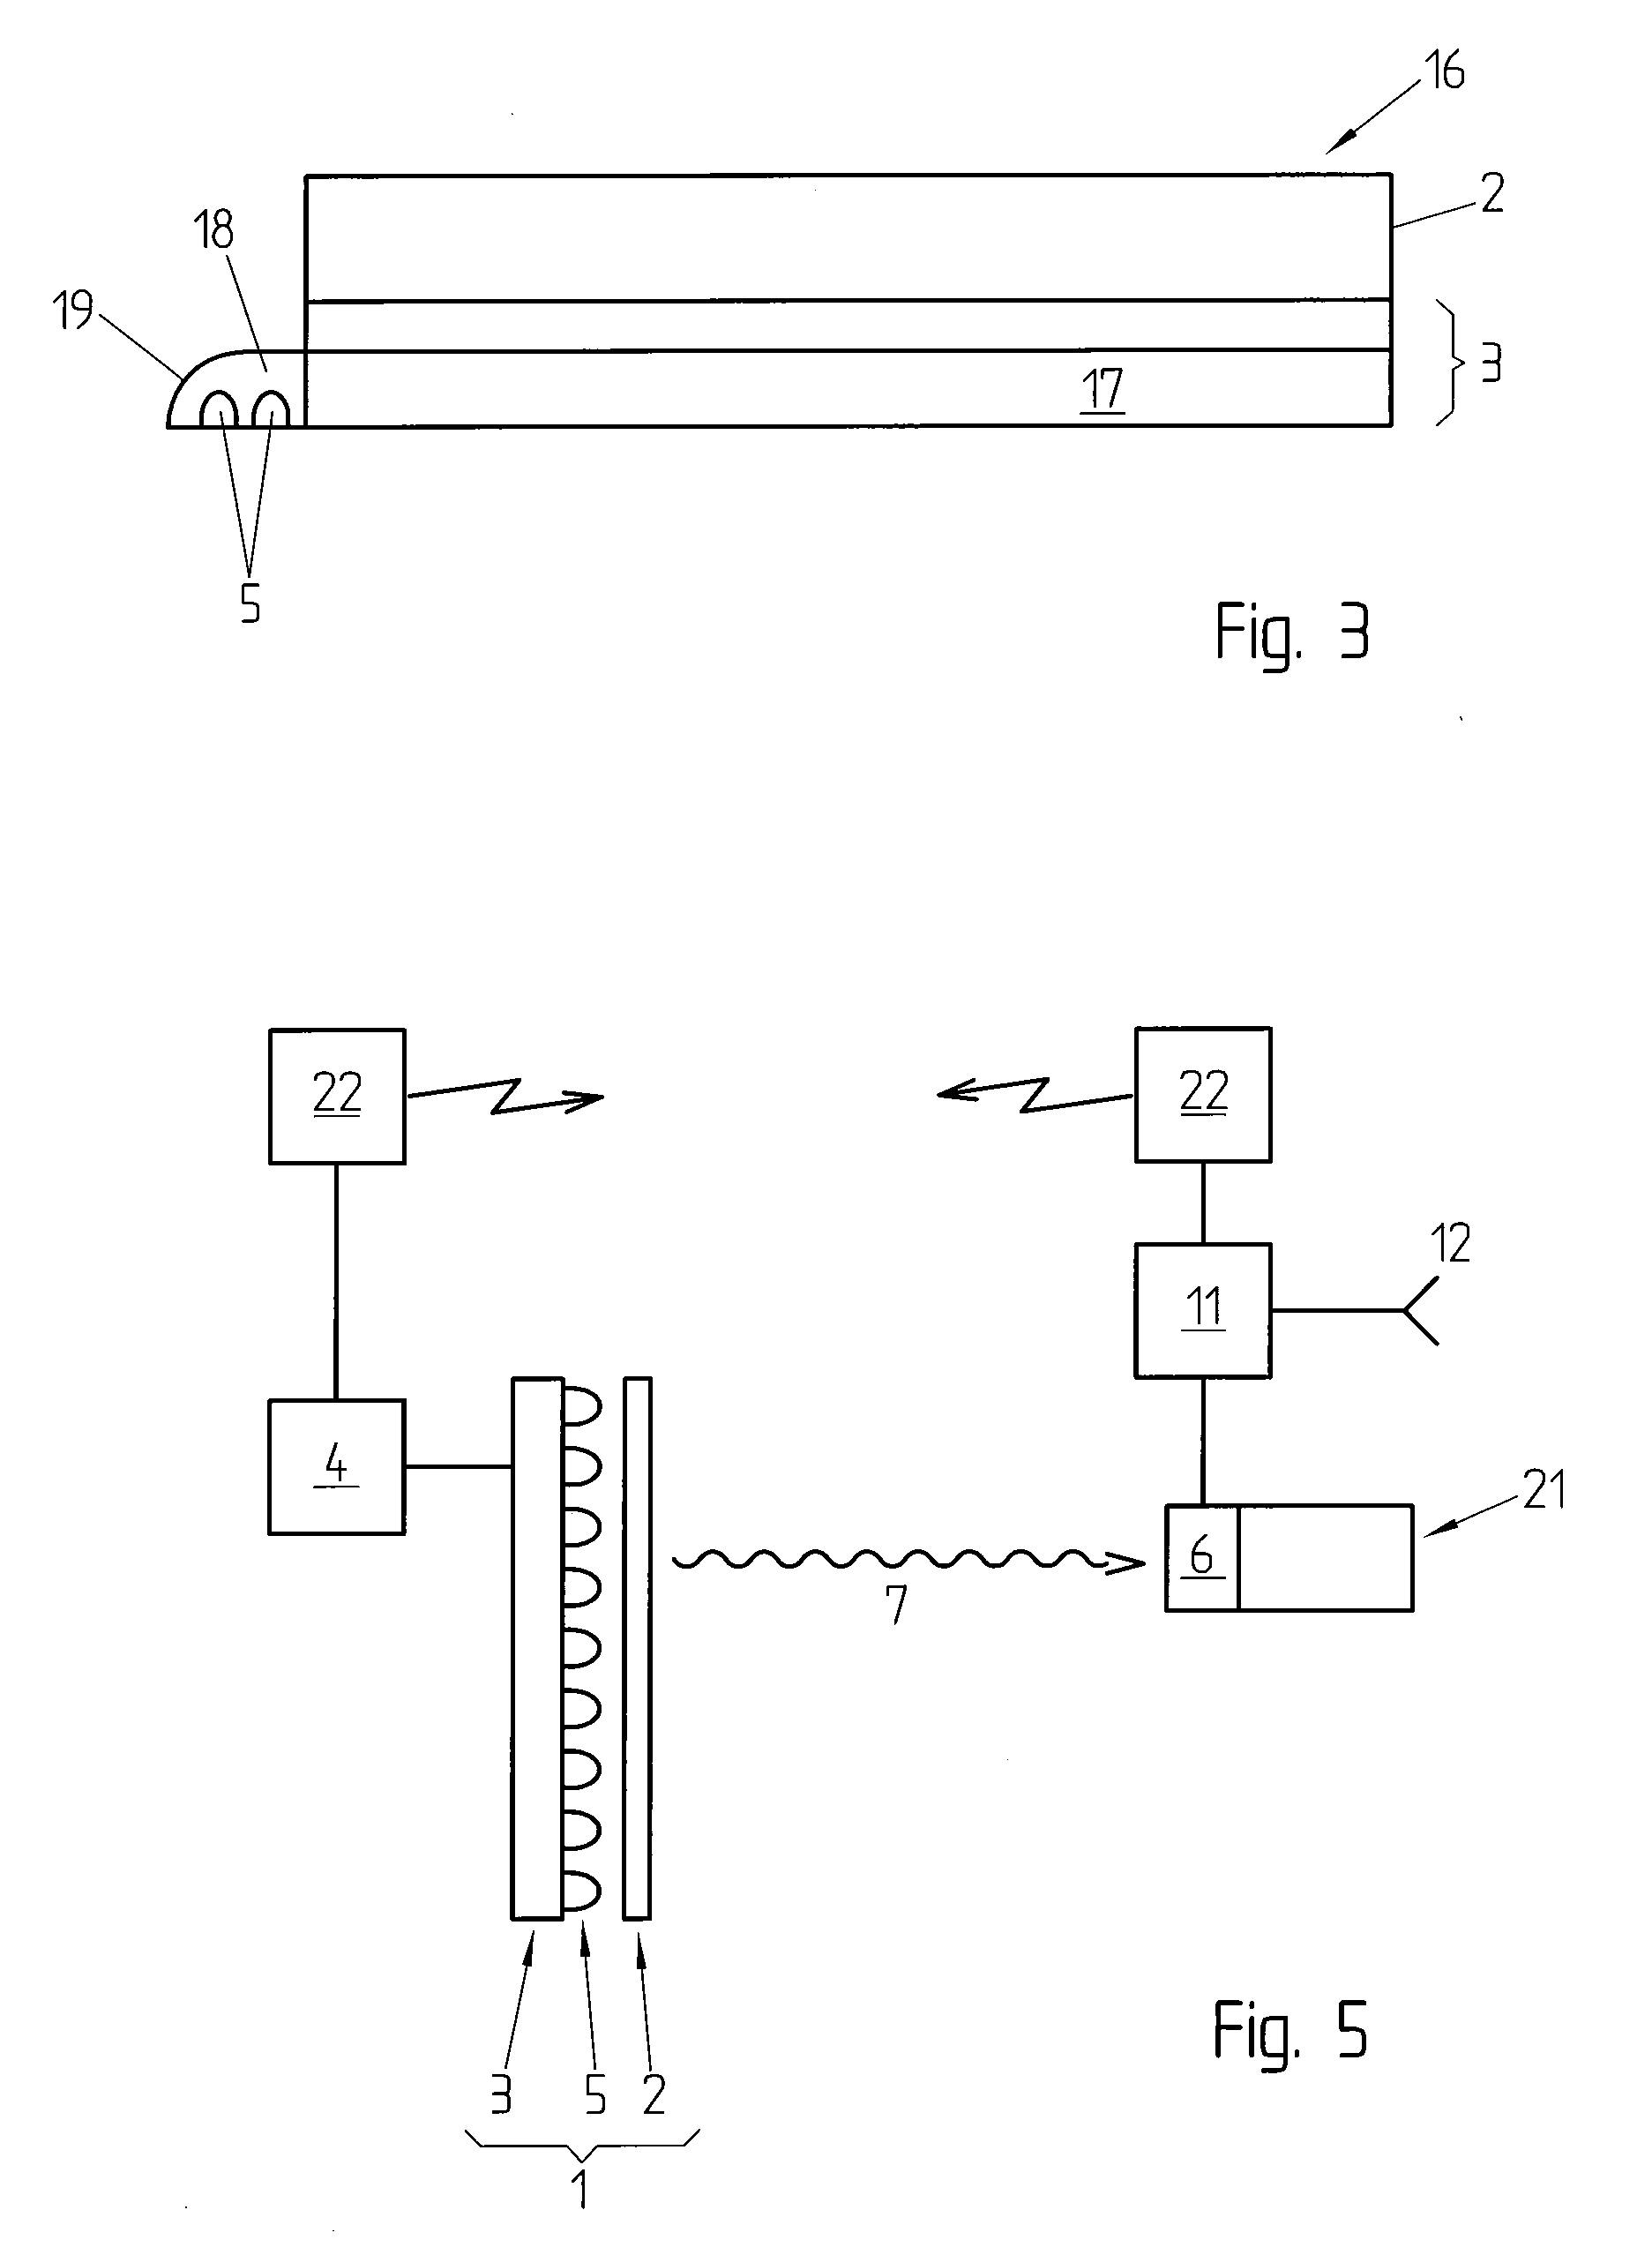 Time-of-flight based imaging system using a display as illumination source